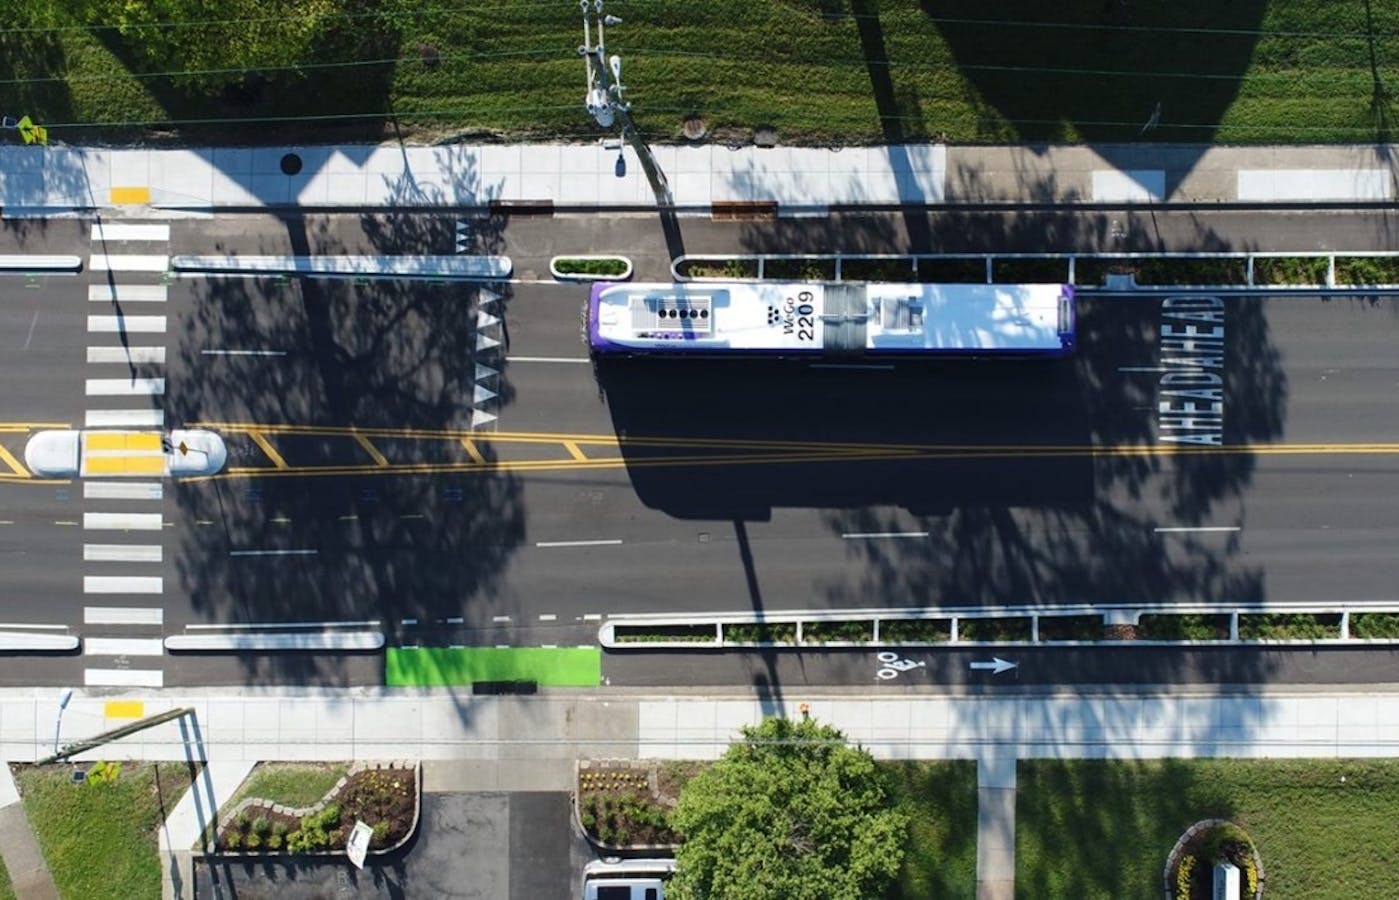 Imagery for the The Best New U.S. Bike Lanes of 2023 story